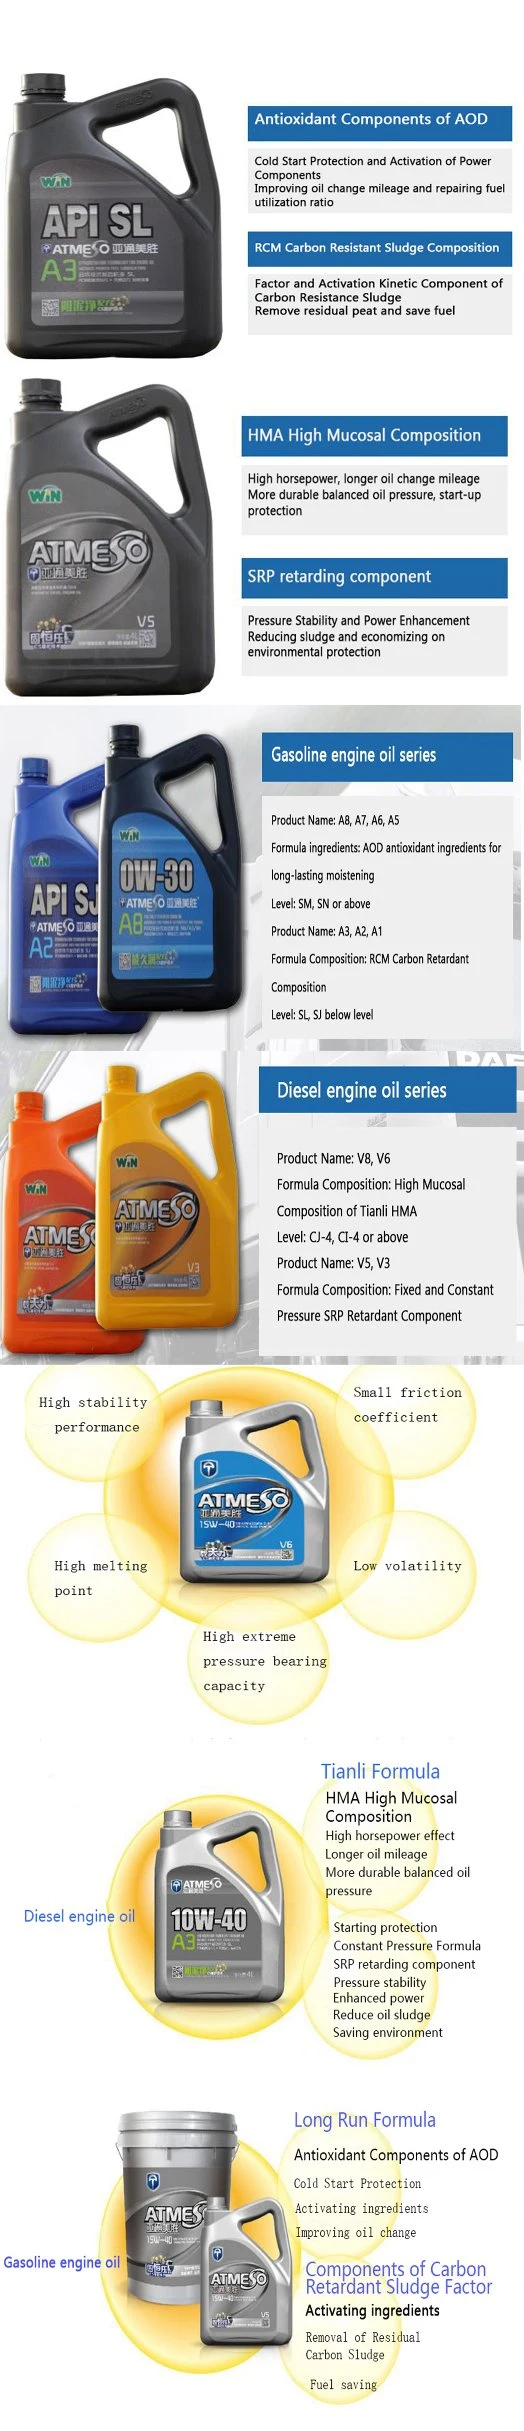 API Sj Synthetic Engine Lubricants Dky182